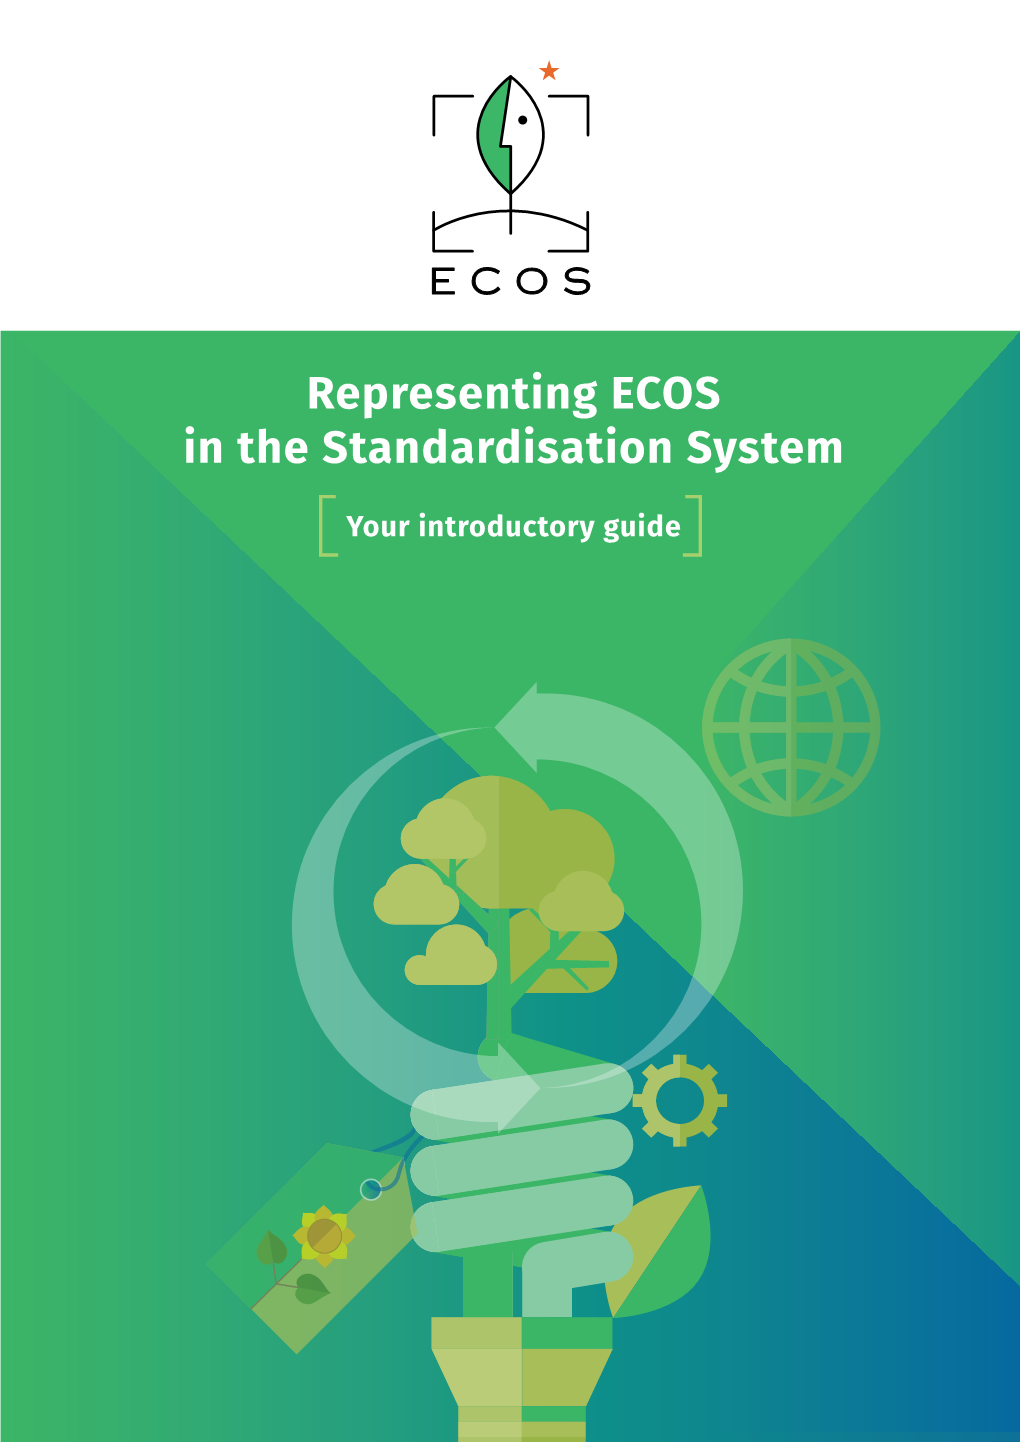 Representing ECOS in the Standardisation System